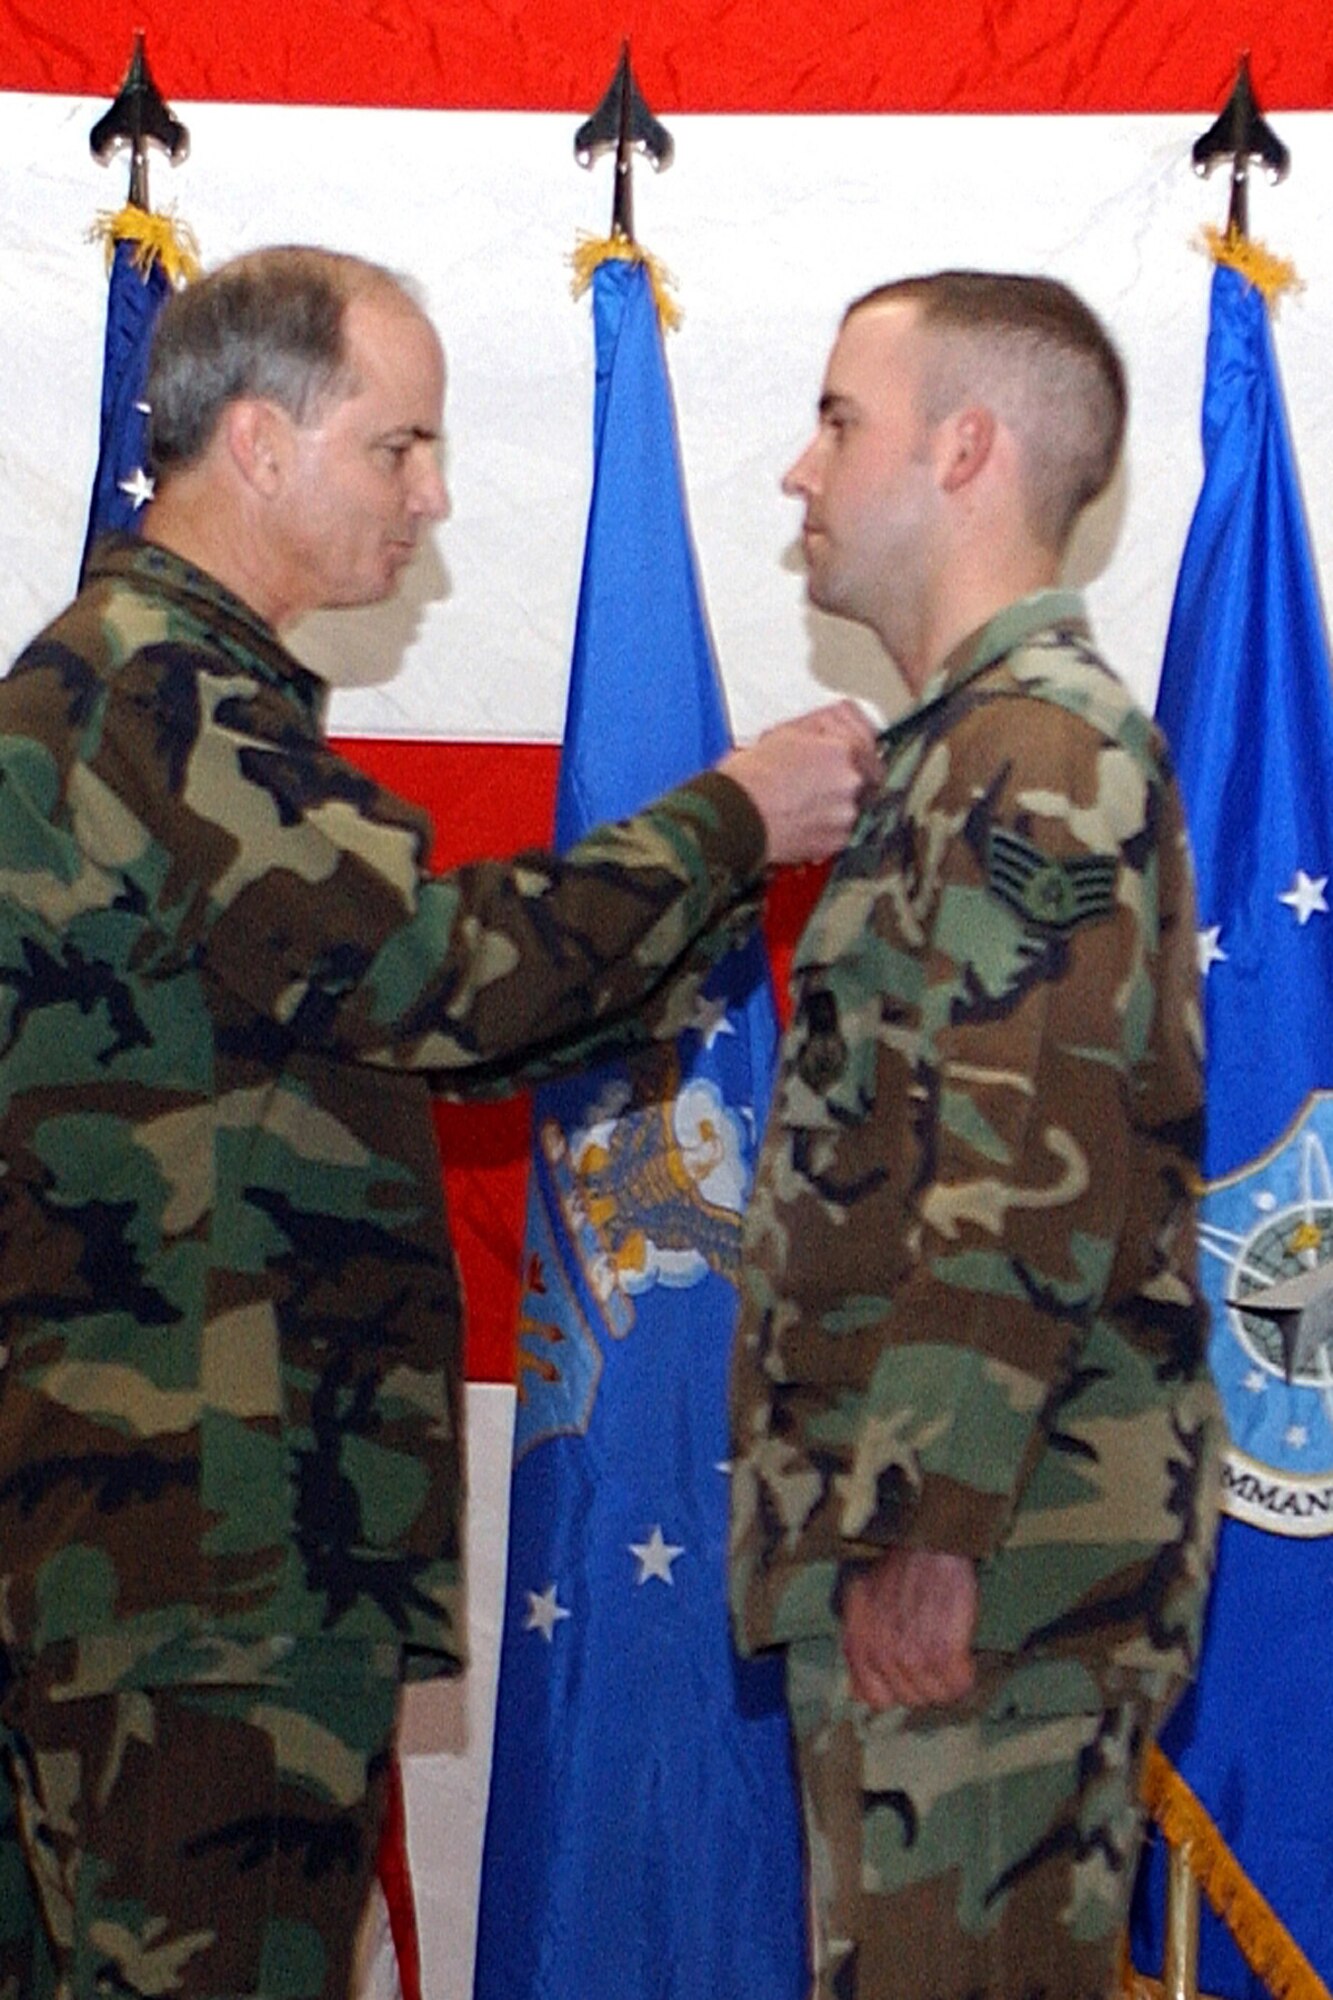 Gen. Kevin P. Chilton, Air Force Space Command commander, awards Staff Sgt. Joshua Abrahamson, 341st Civil Engineer Squadron, with the bronze star for his meritorious service ovrseas.